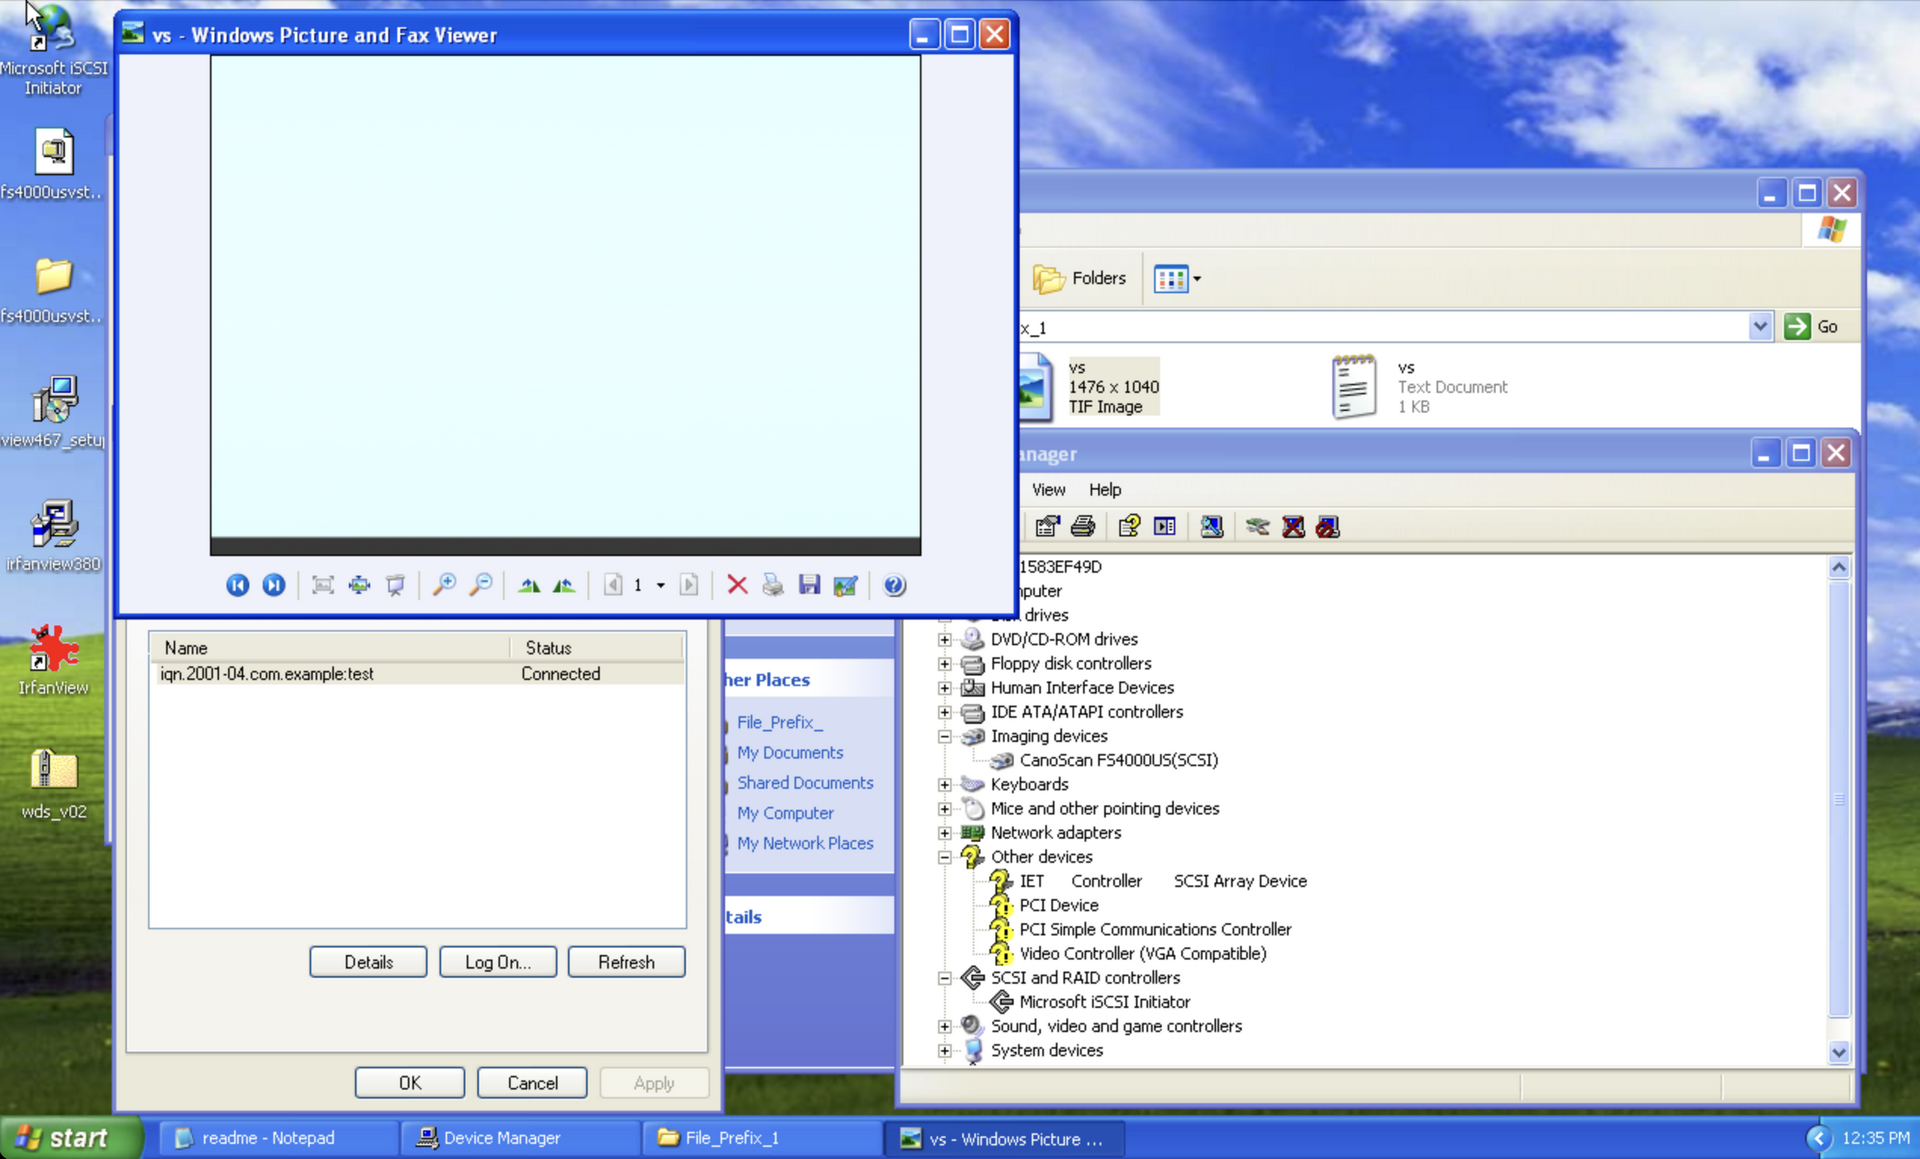 Windows picture viewer showing a scan, along with device manager and the Windows iSCSI initiator software